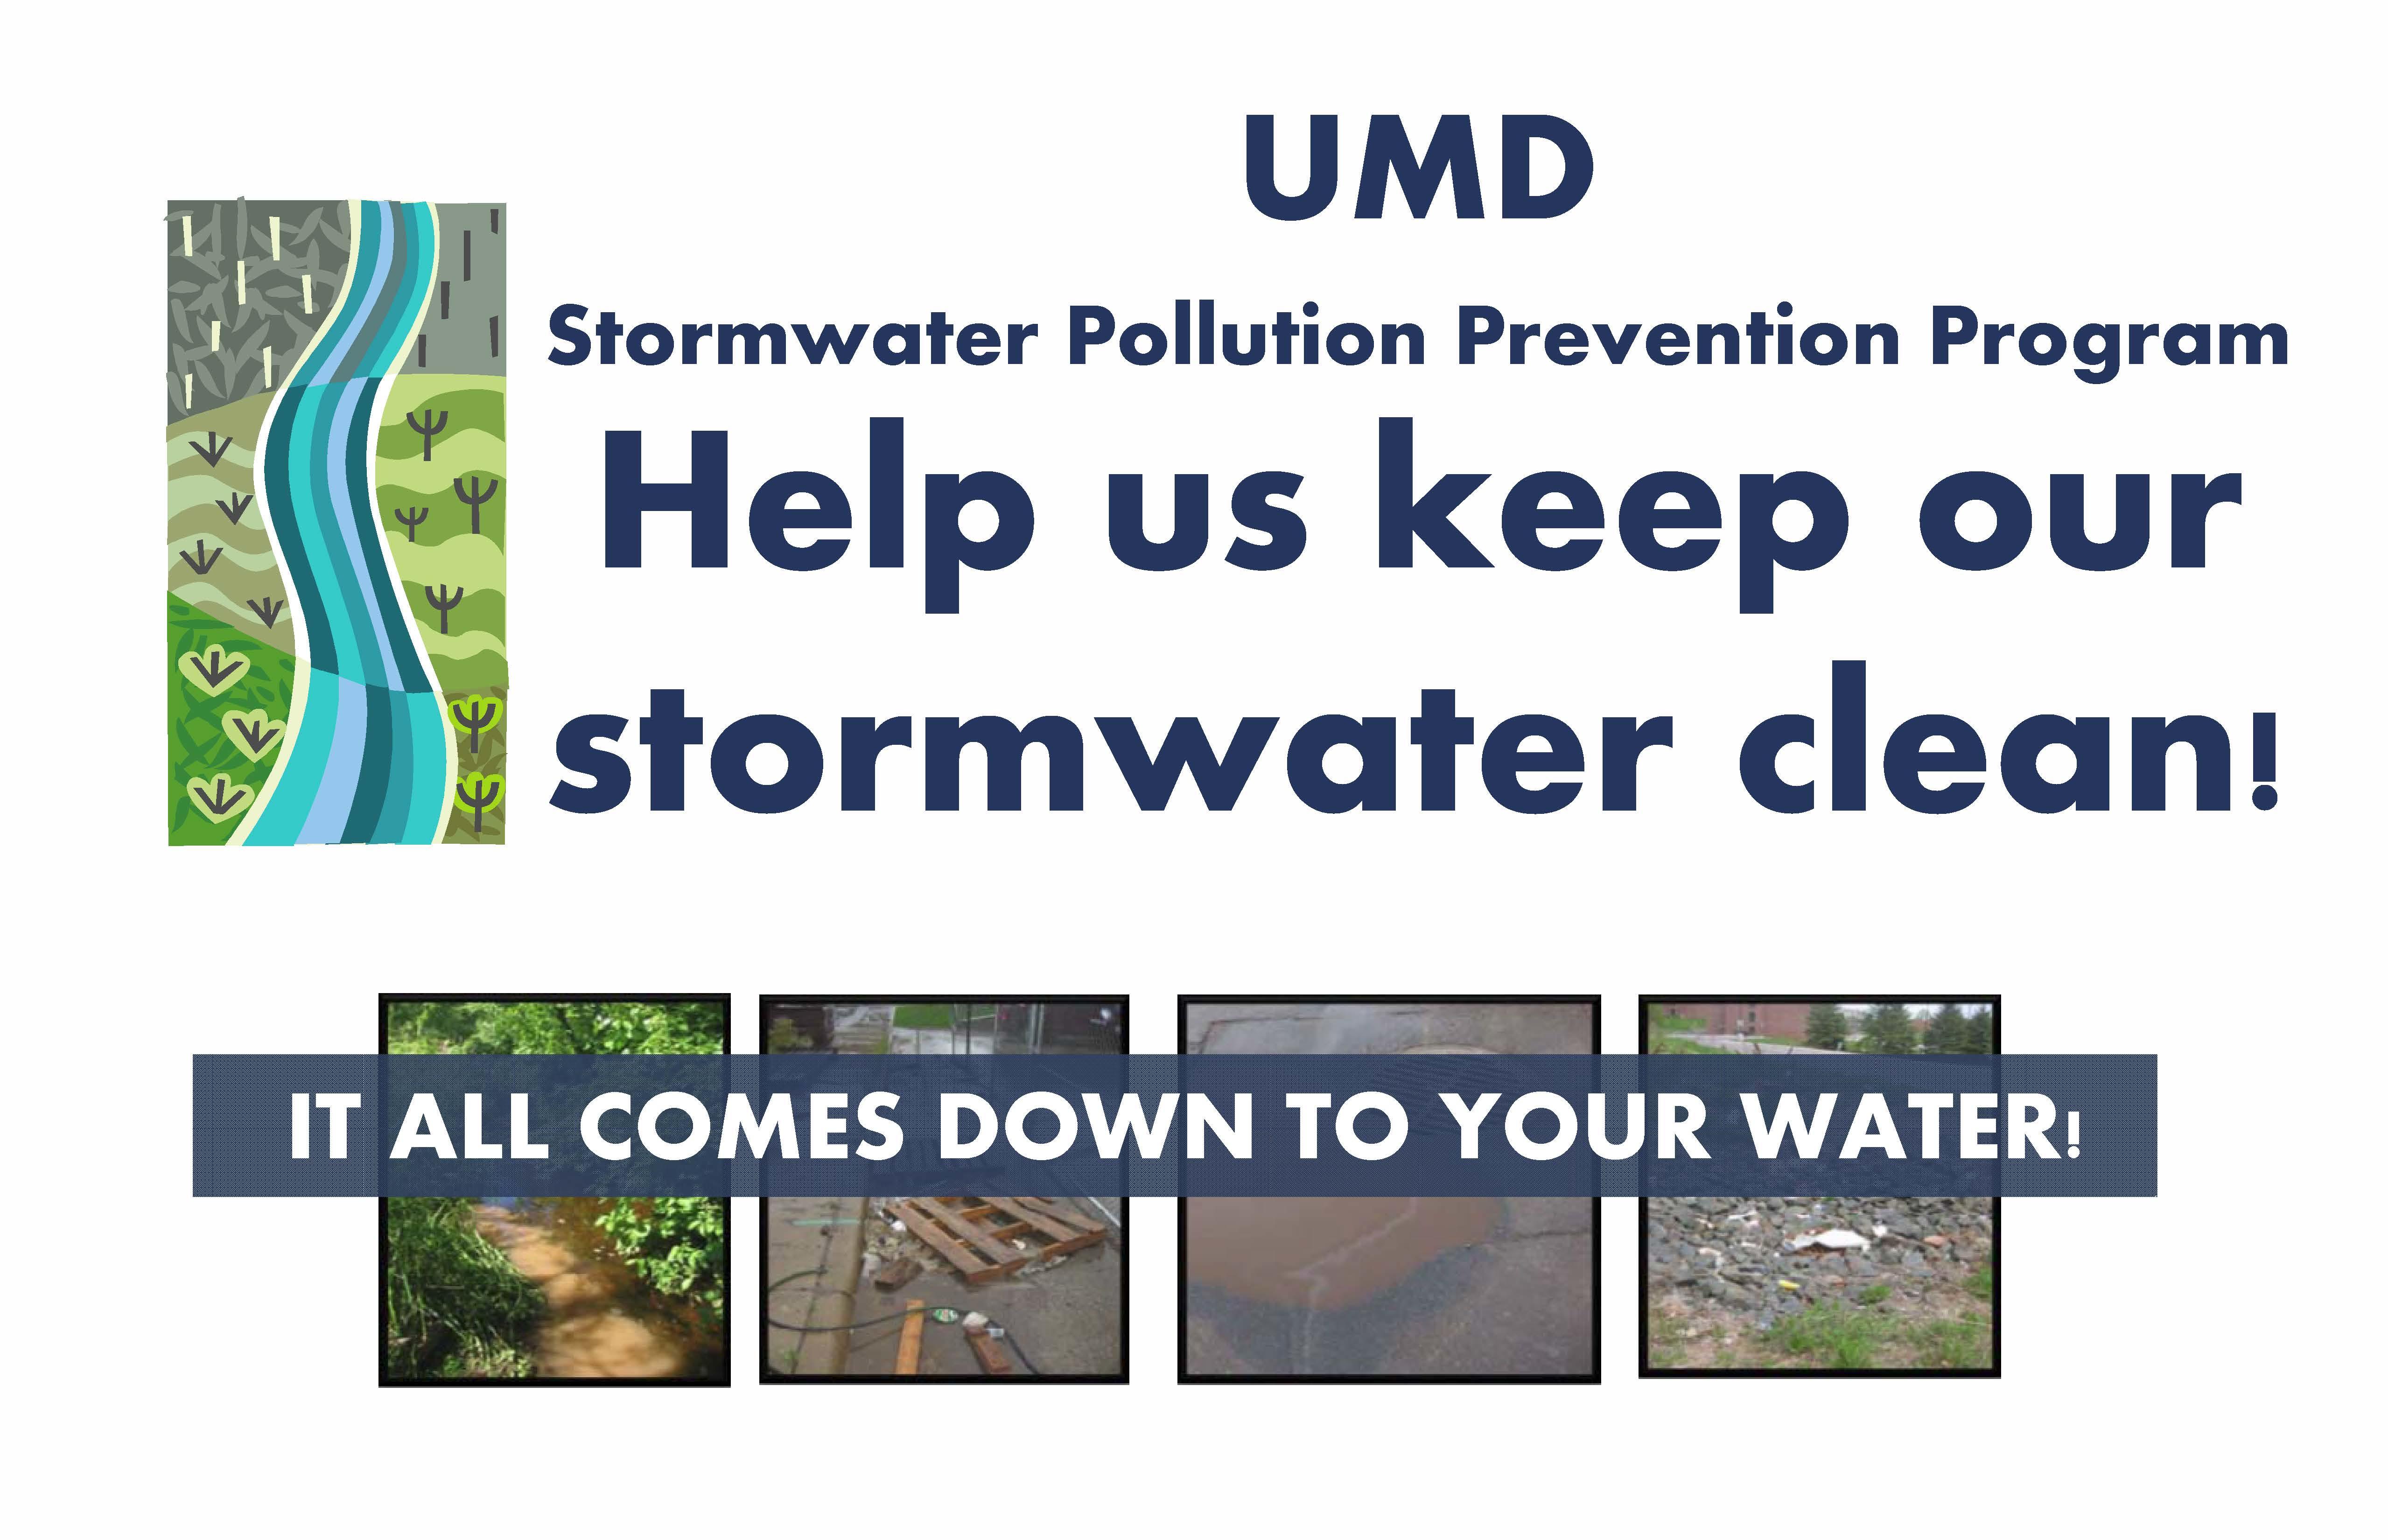 UMD Stormwater pollution prevention program. Help us keep our stormwater clean! It all comes down to your water.